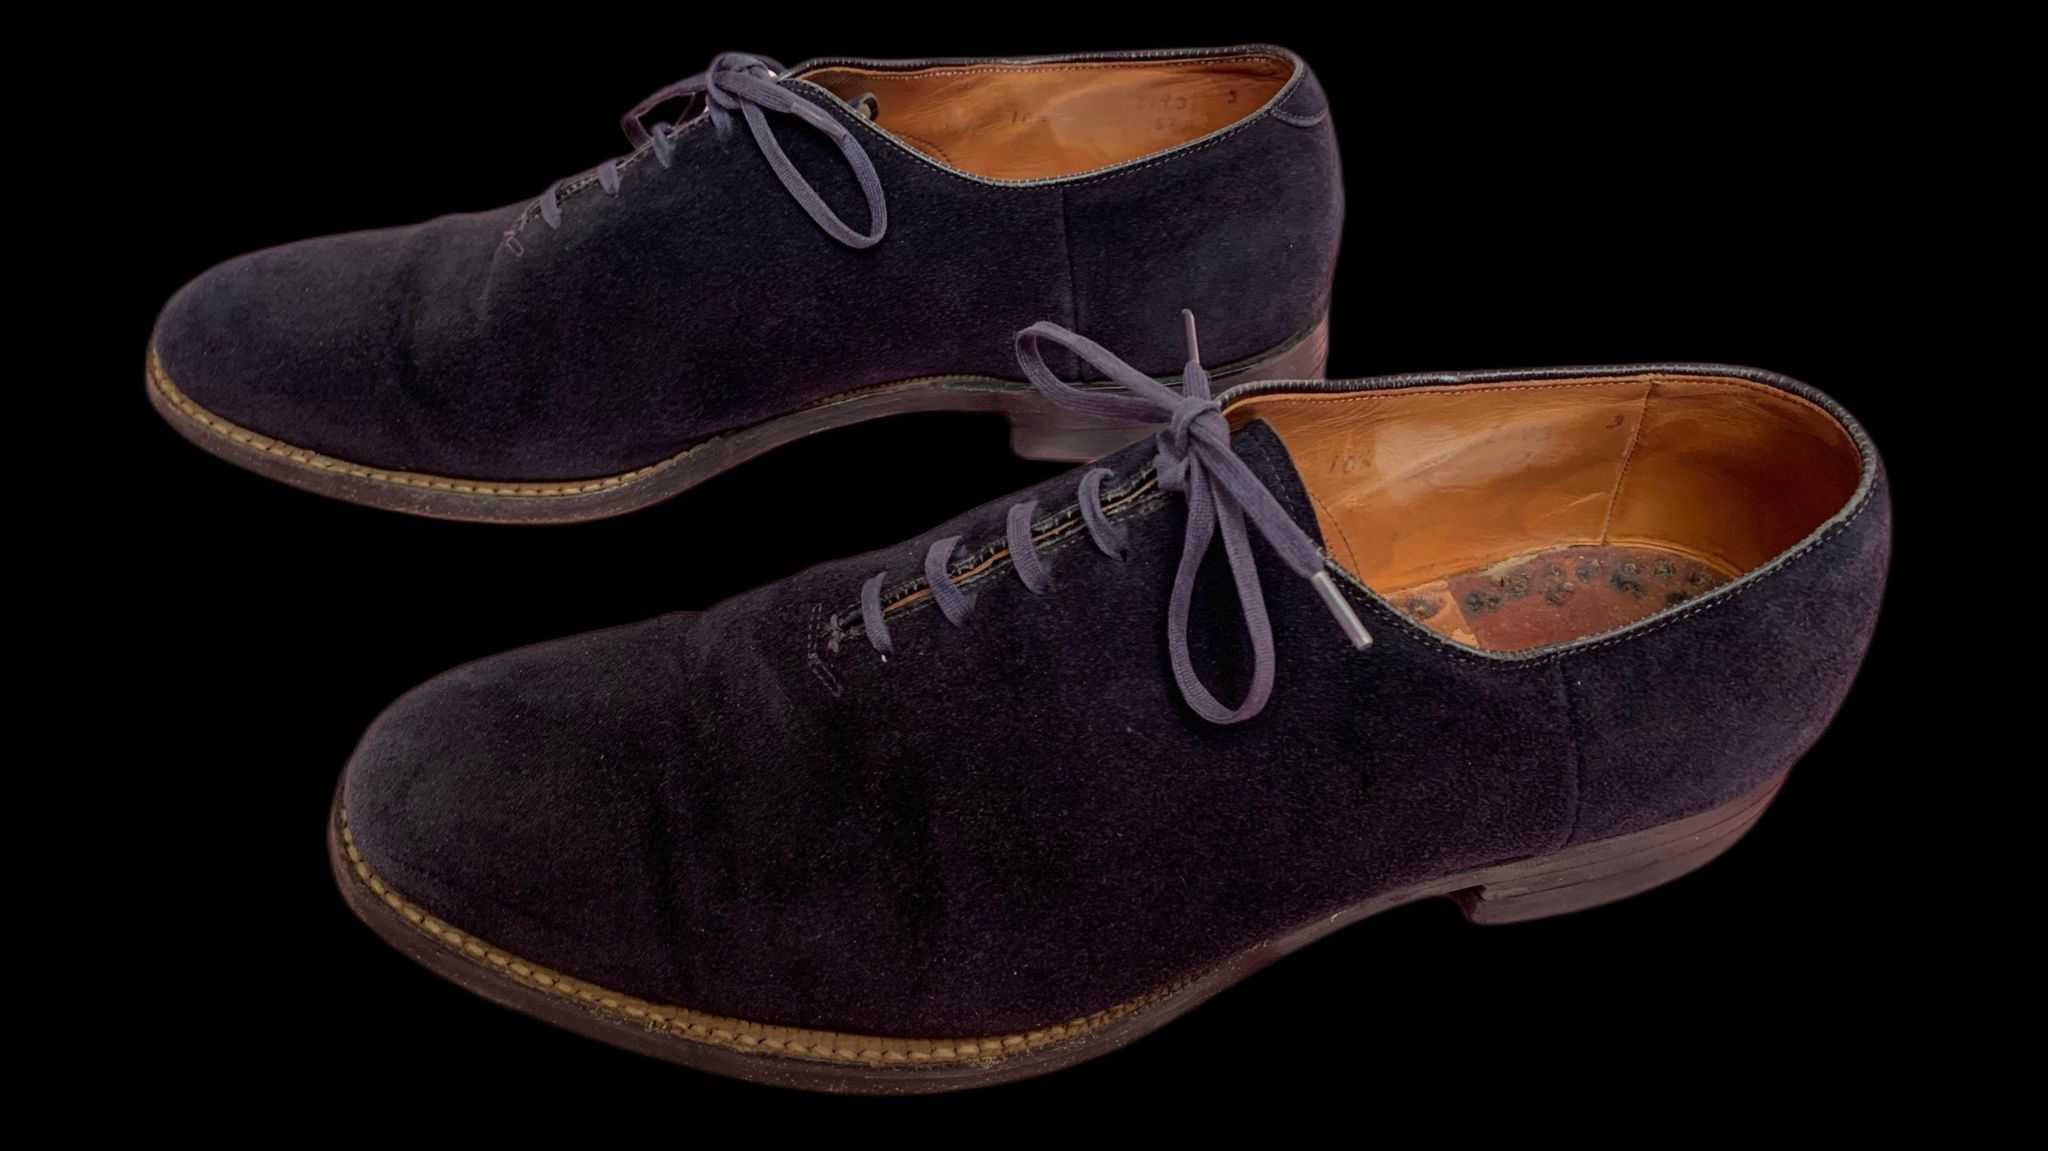 Blue suede shoes owned by Elvis which feature laces and a brown leather insole